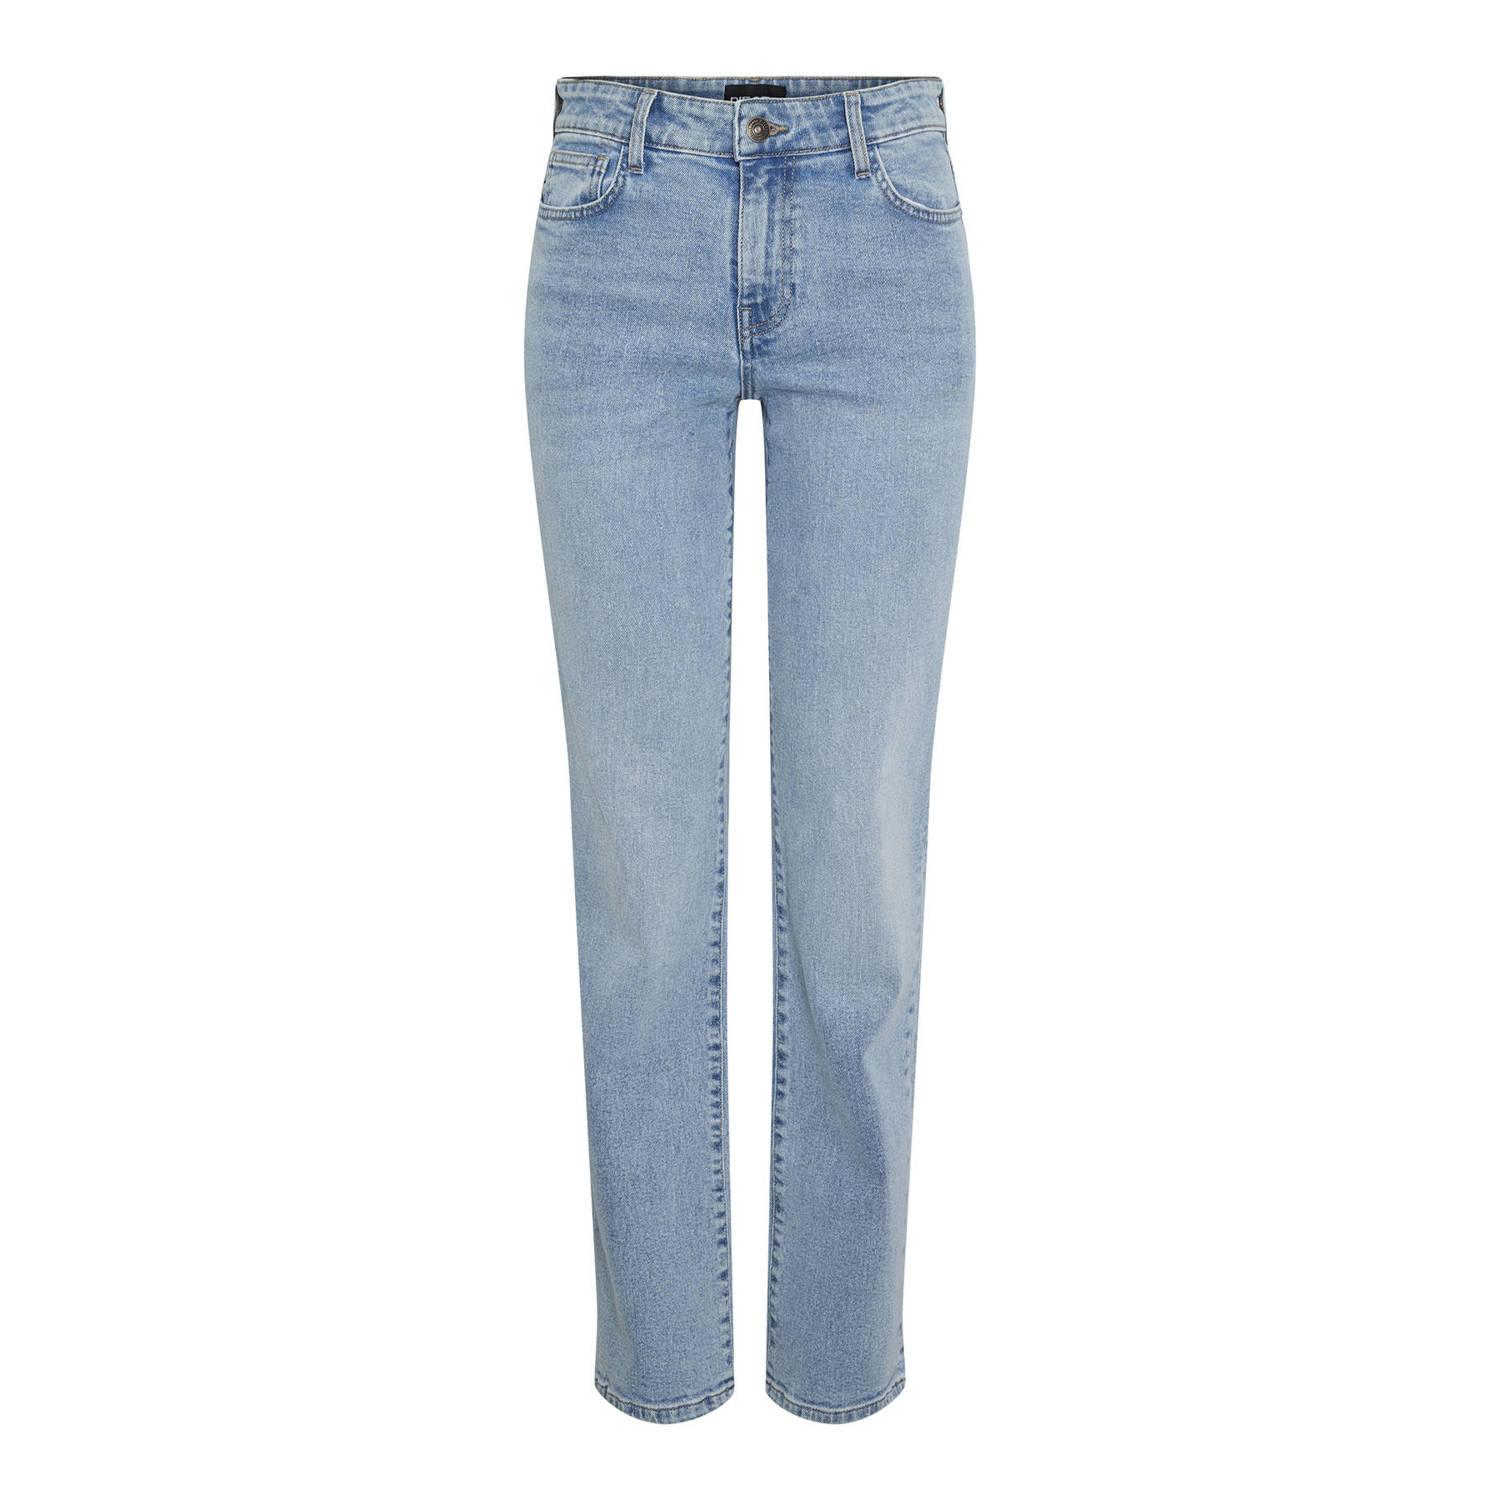 PIECES straight jeans PCKELLY light blue denim